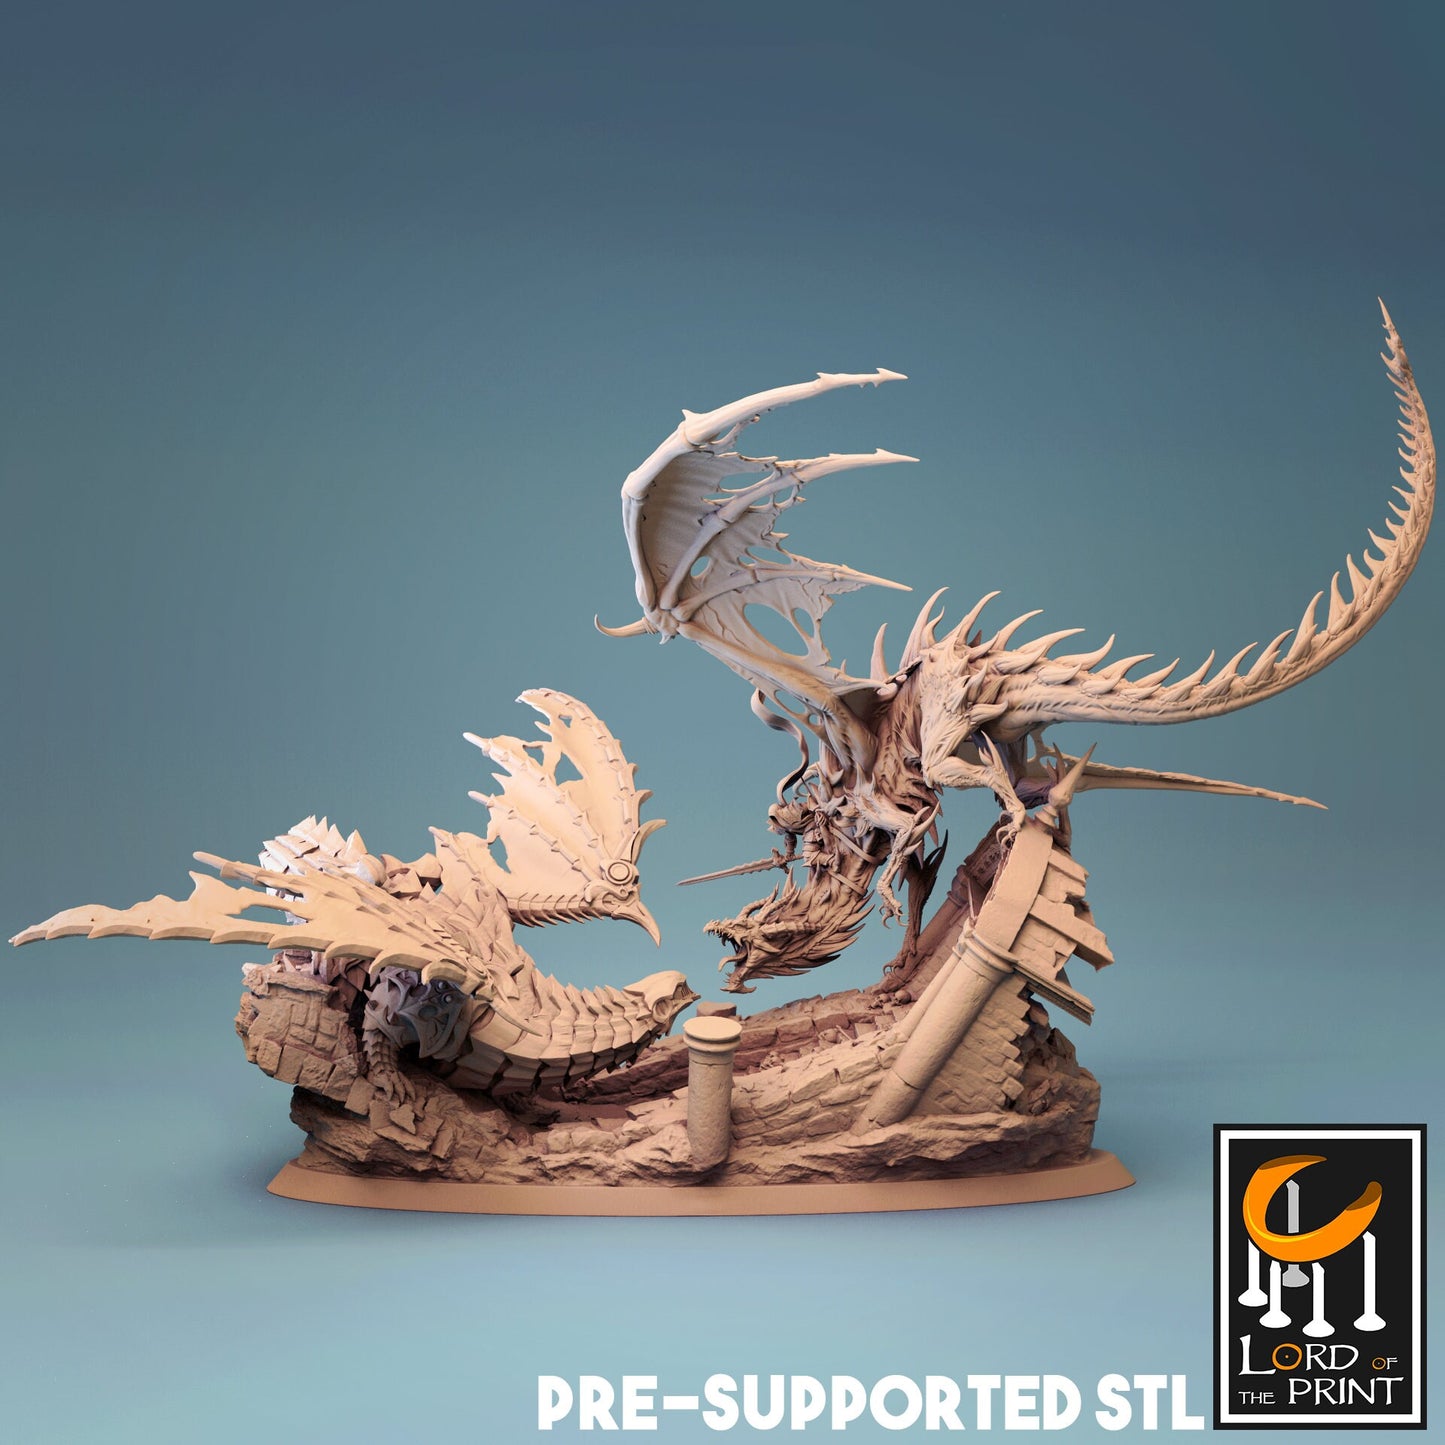 Cursed VS Armored Dragon Miniature, by Lord of the Print // 3D Print on Demand / D&D / Pathfinder / RPG / DRAGON